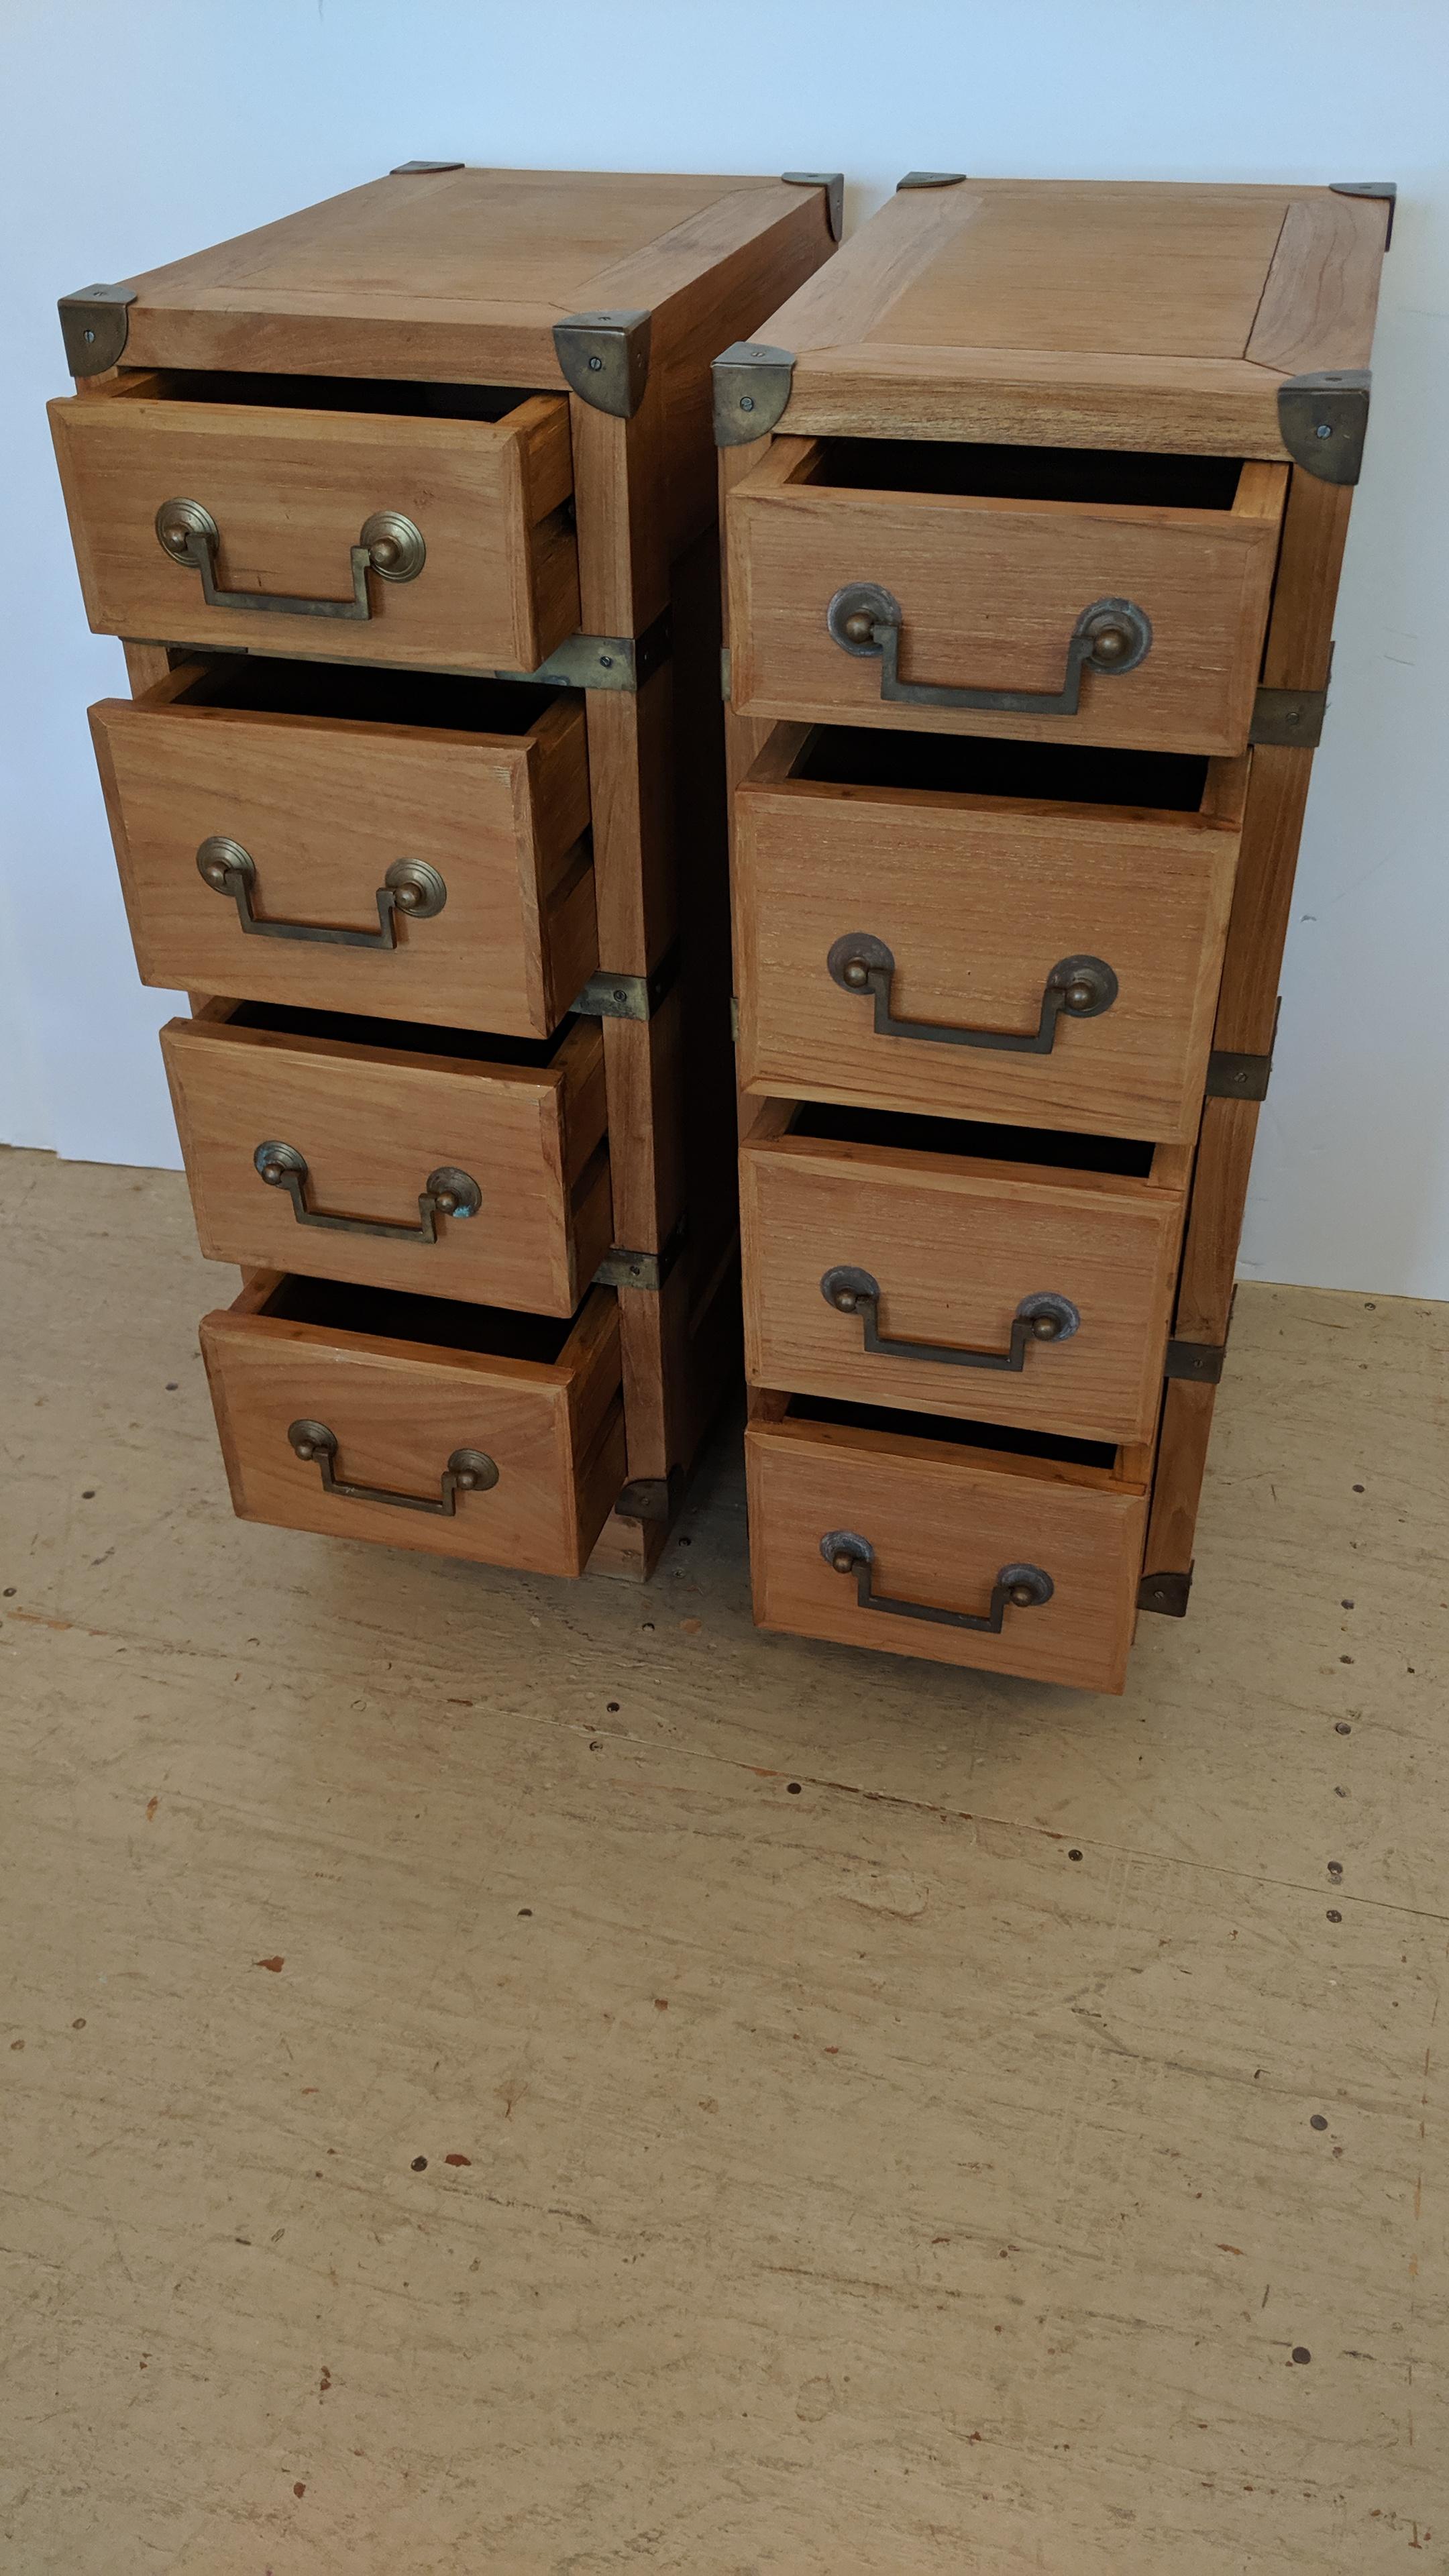 A pair of handsome versatile 4-drawer Campaign style tall and narrow chests, nightstands or end tables having brass hardware and light colored teak wood.